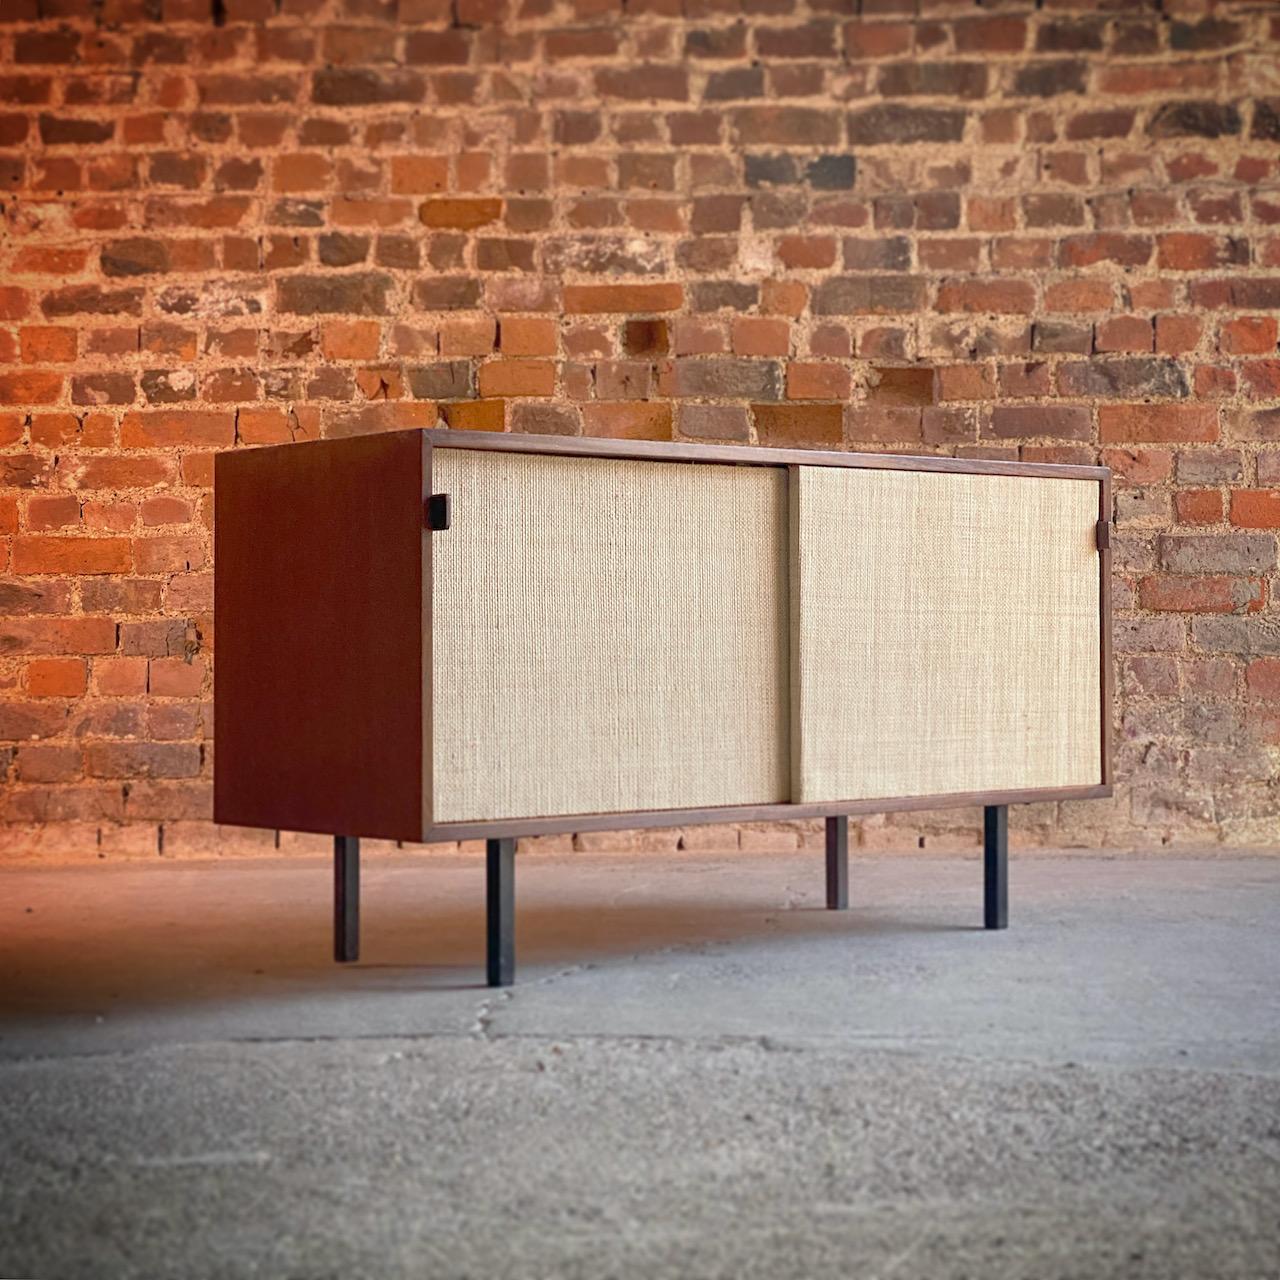 Florence Knoll Model 116 walnut & seagrass credenza, USA, 1948.

Fabulous Florence Knoll Model 116 Seagrass & Walnut Credenza for Knoll International, USA circa 1948, a scarce and early Model ‘116' produced by Knoll International, with two rattan